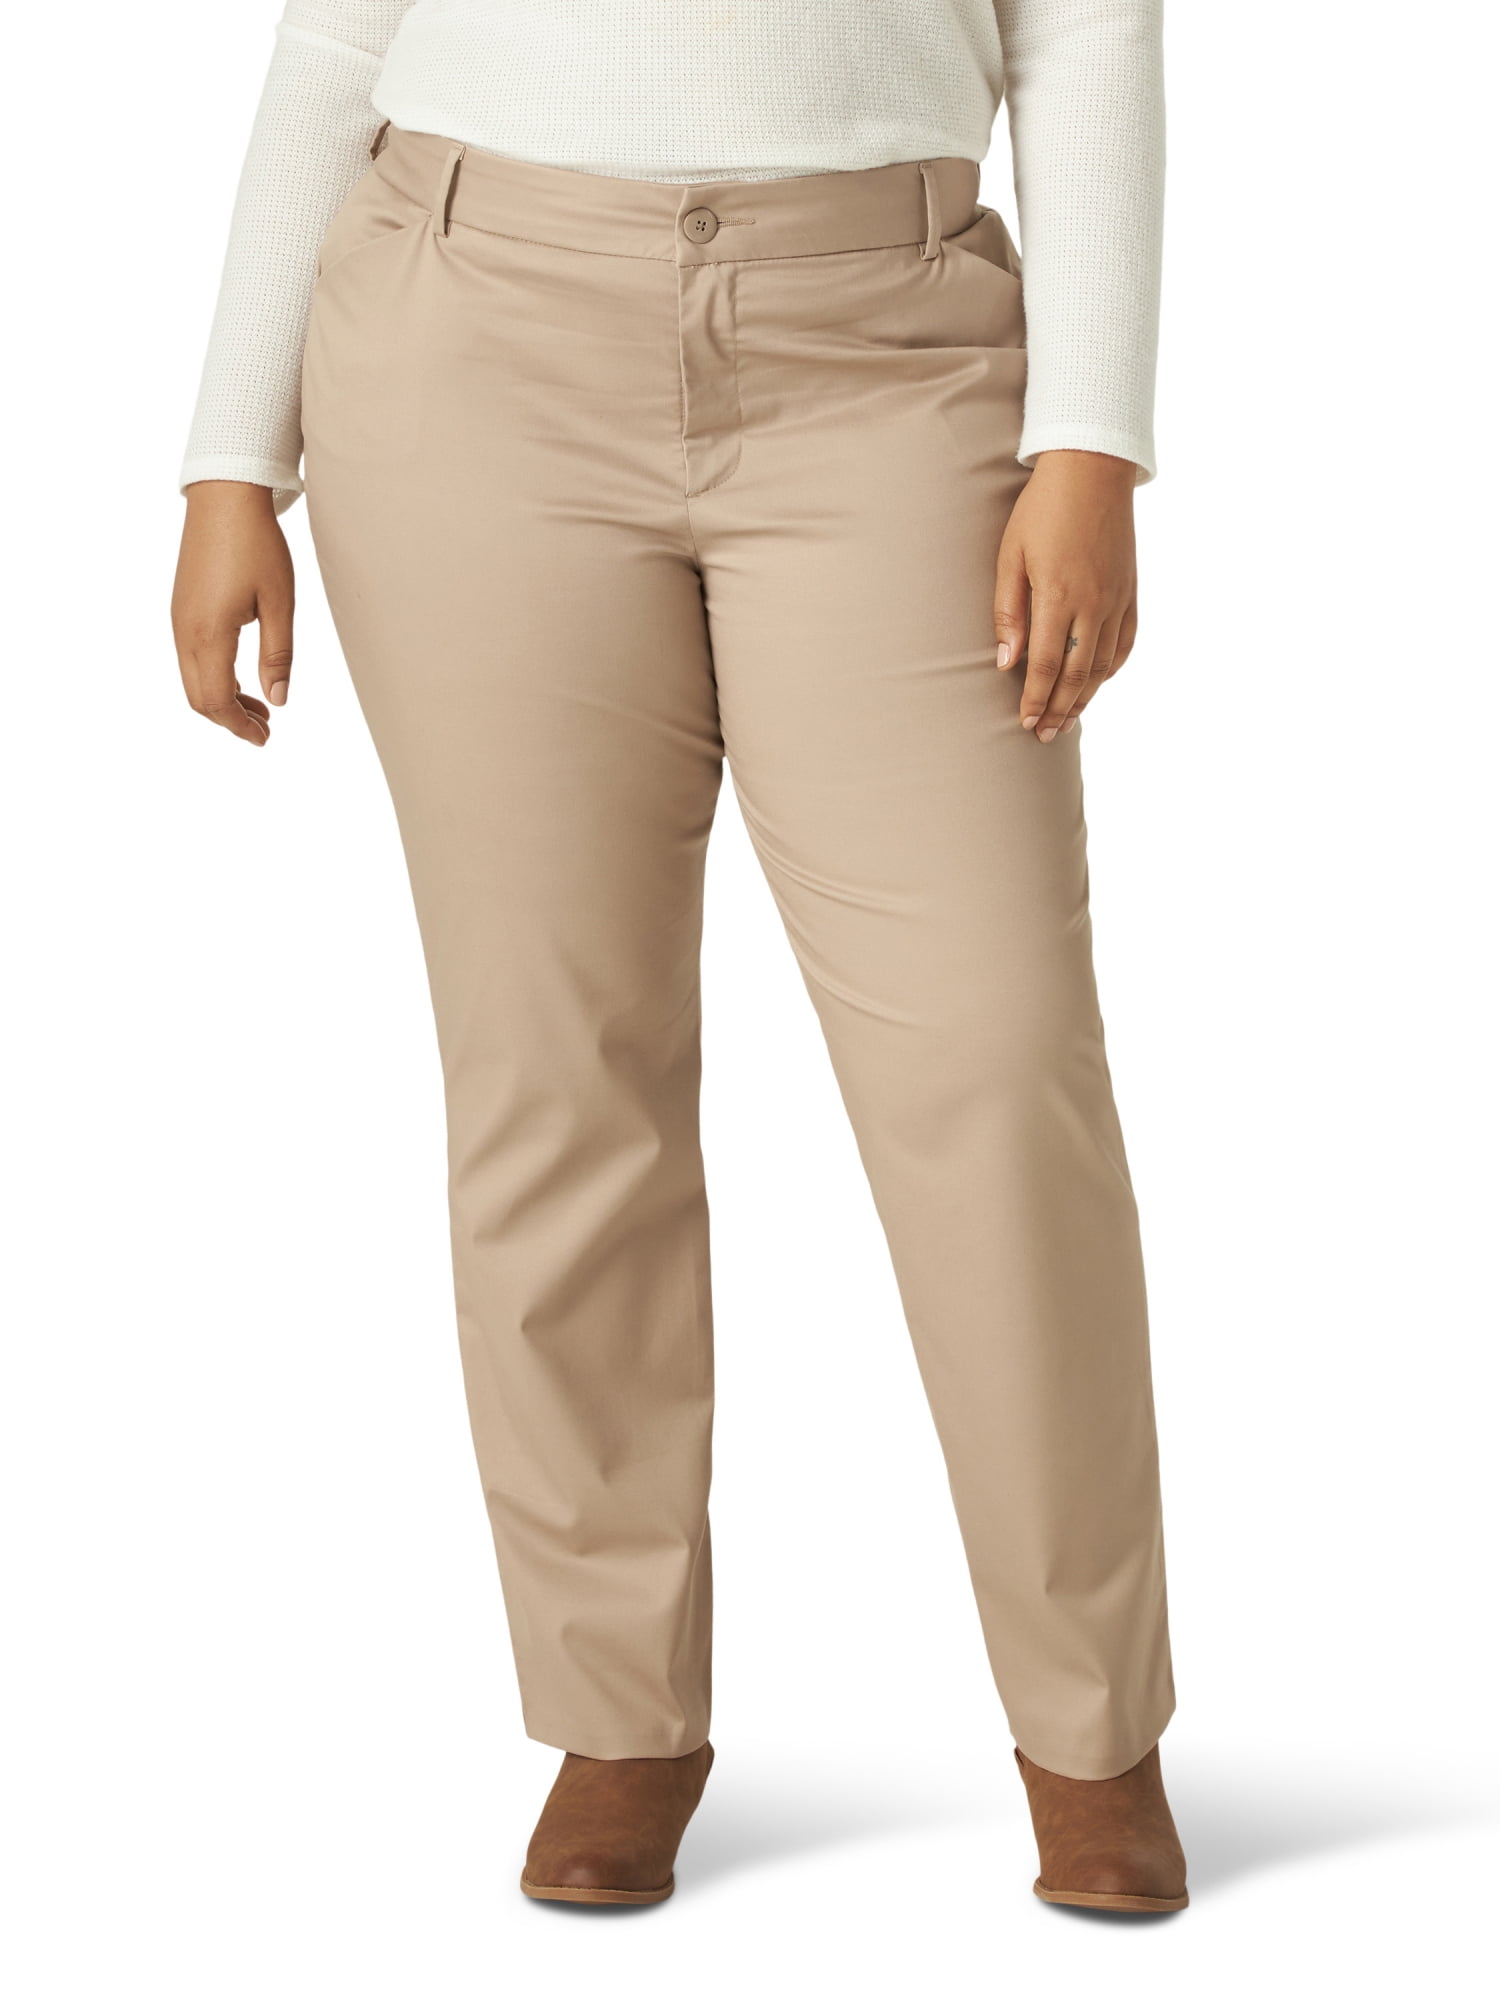 Lee Women's Plus Size Relaxed-fit Side-Elastic Pant